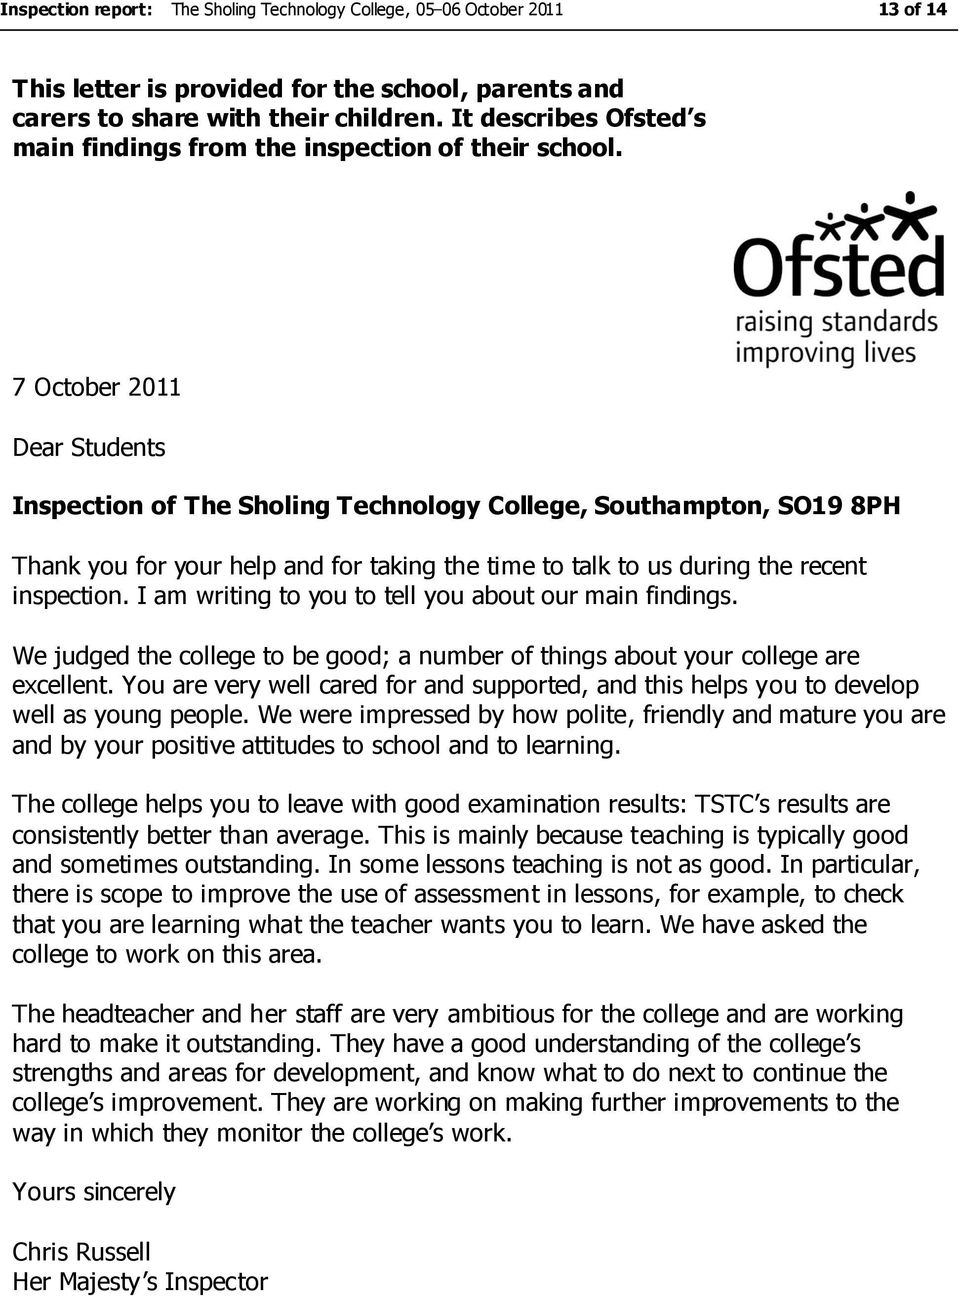 7 October 011 Dear Students Inspection of The Sholing Technology College, Southampton, SO19 8PH Thank you for your help and for taking the time to talk to us during the recent inspection.